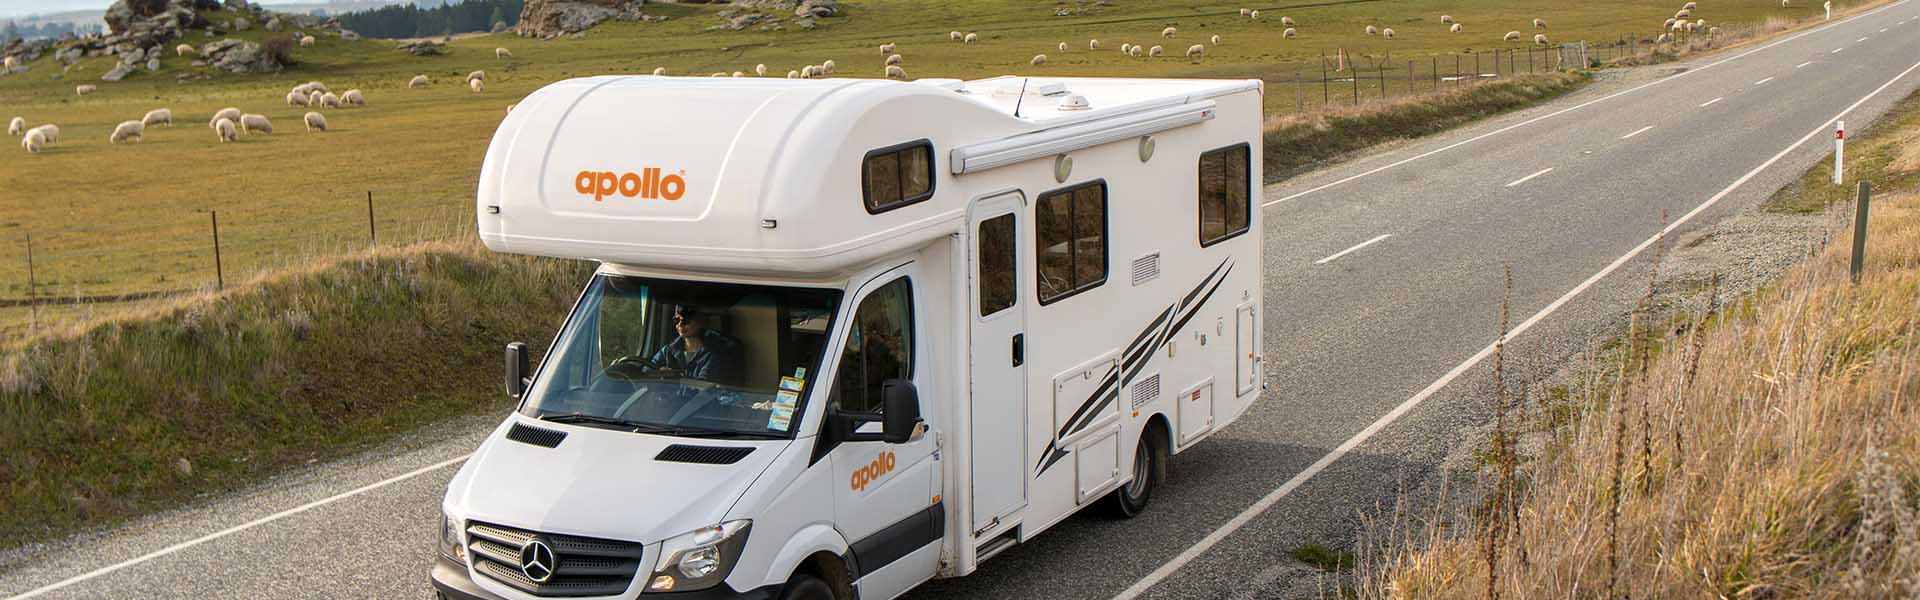 Apollo rental motorhome driving along New Zealand country side road